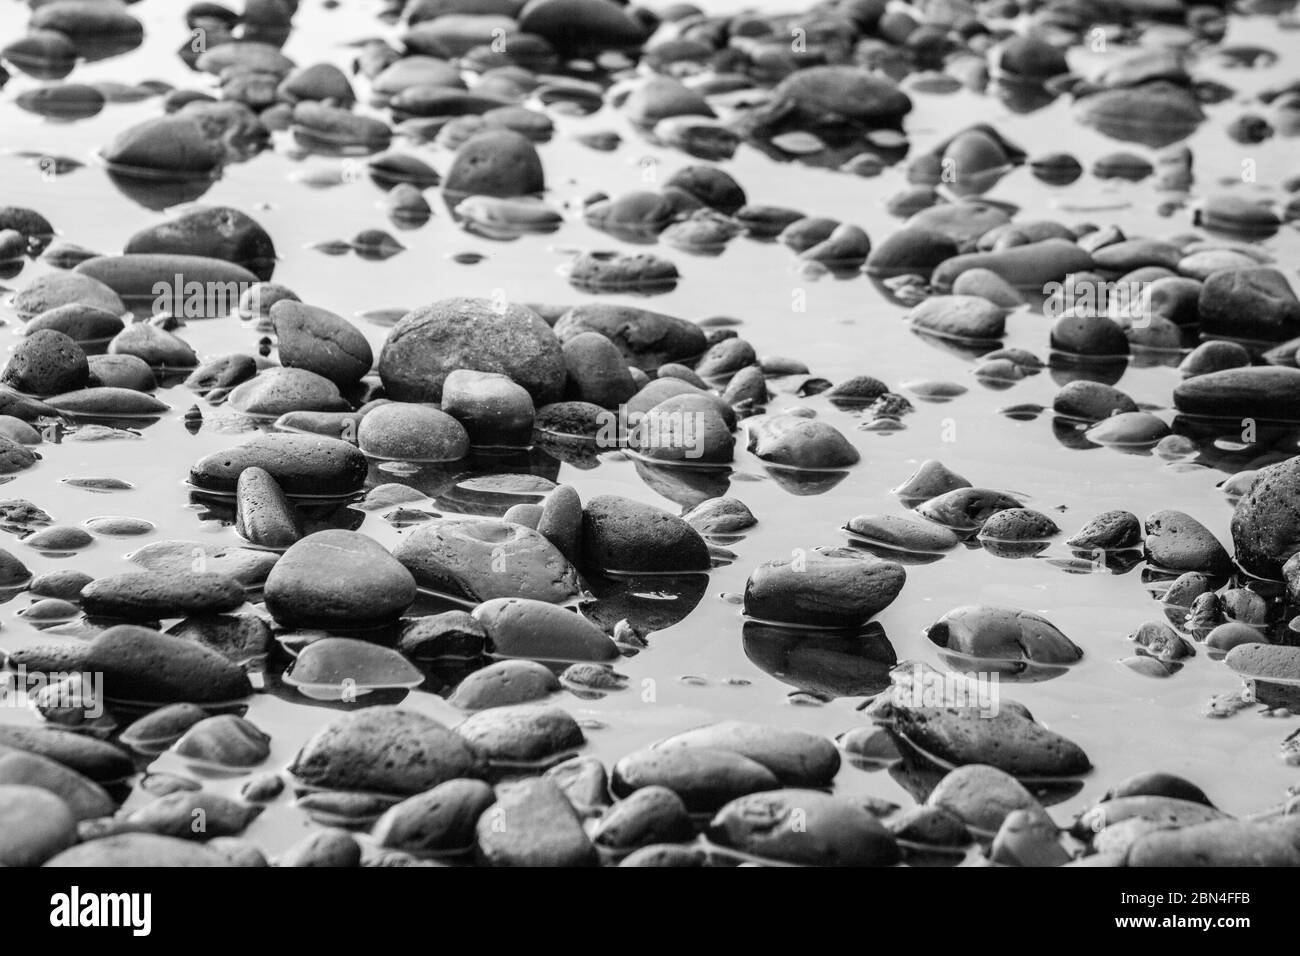 Gray pebbles stones on the shore close up view from above Stock Photo